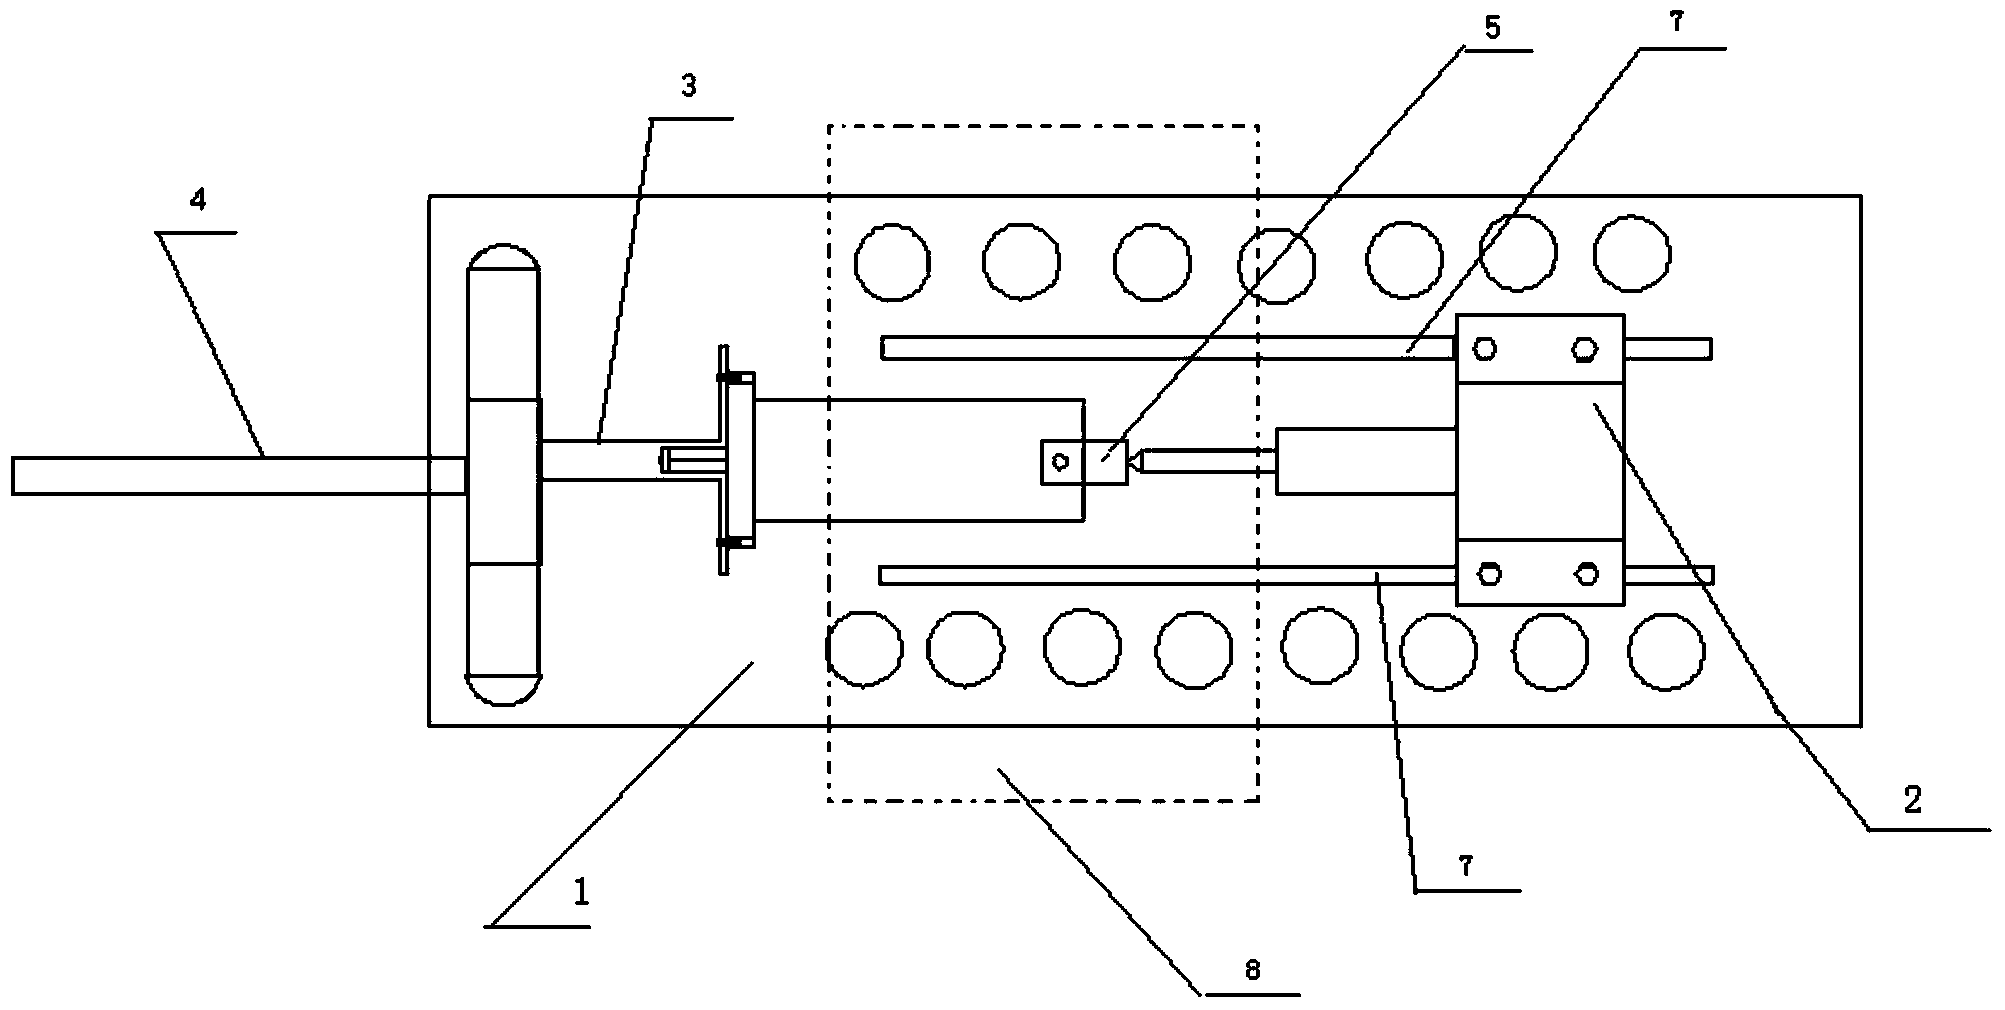 Device for improving magnetic testing sensitivity of aviation engine blade